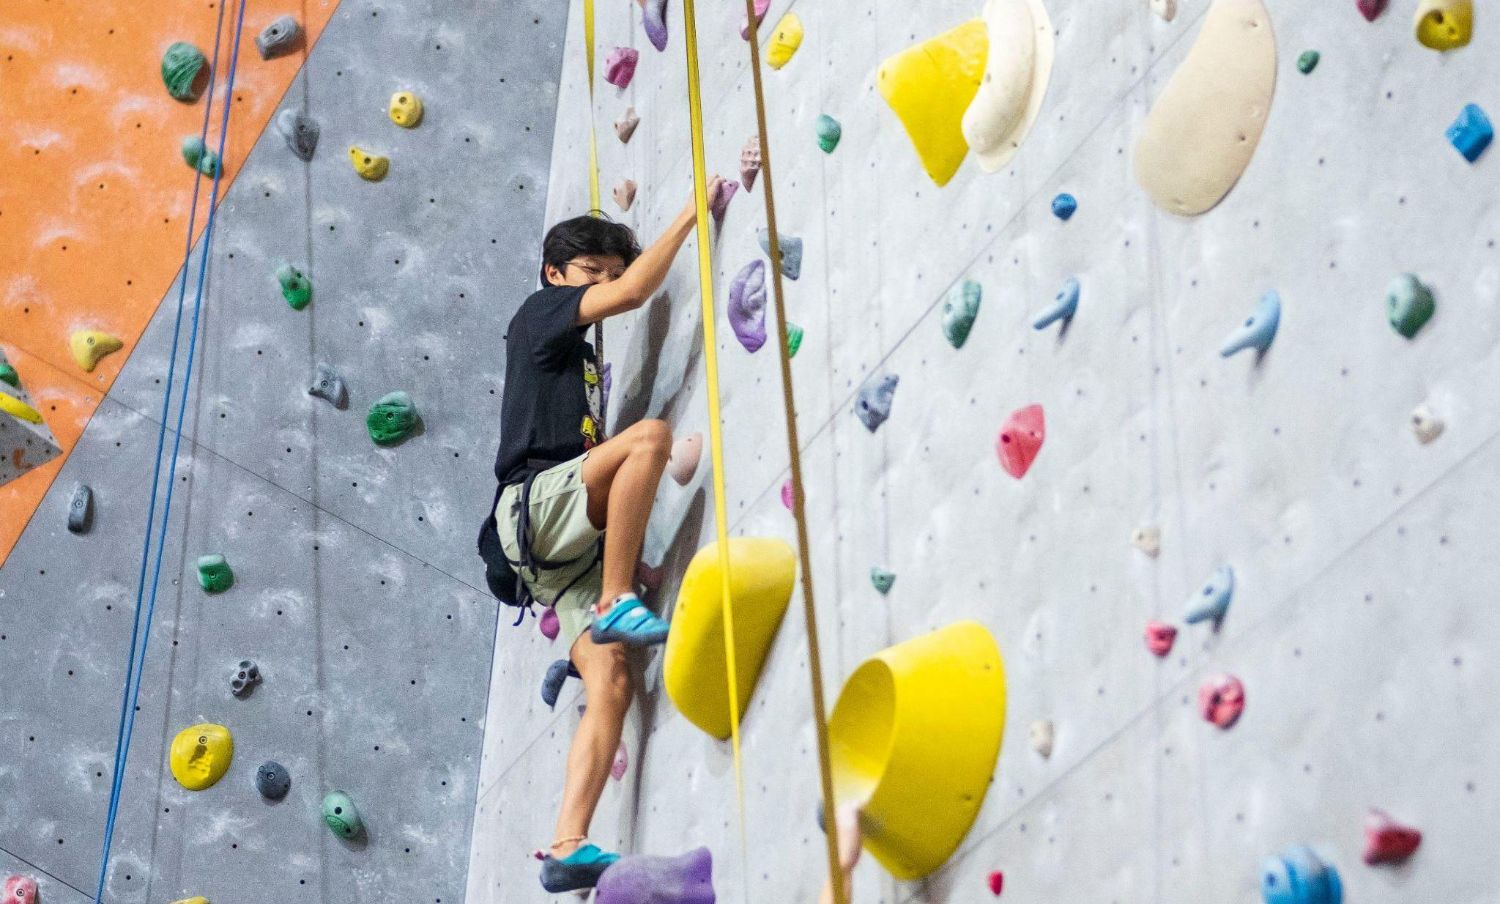 Climb Central boasts of 750-square-meter wall climbing space